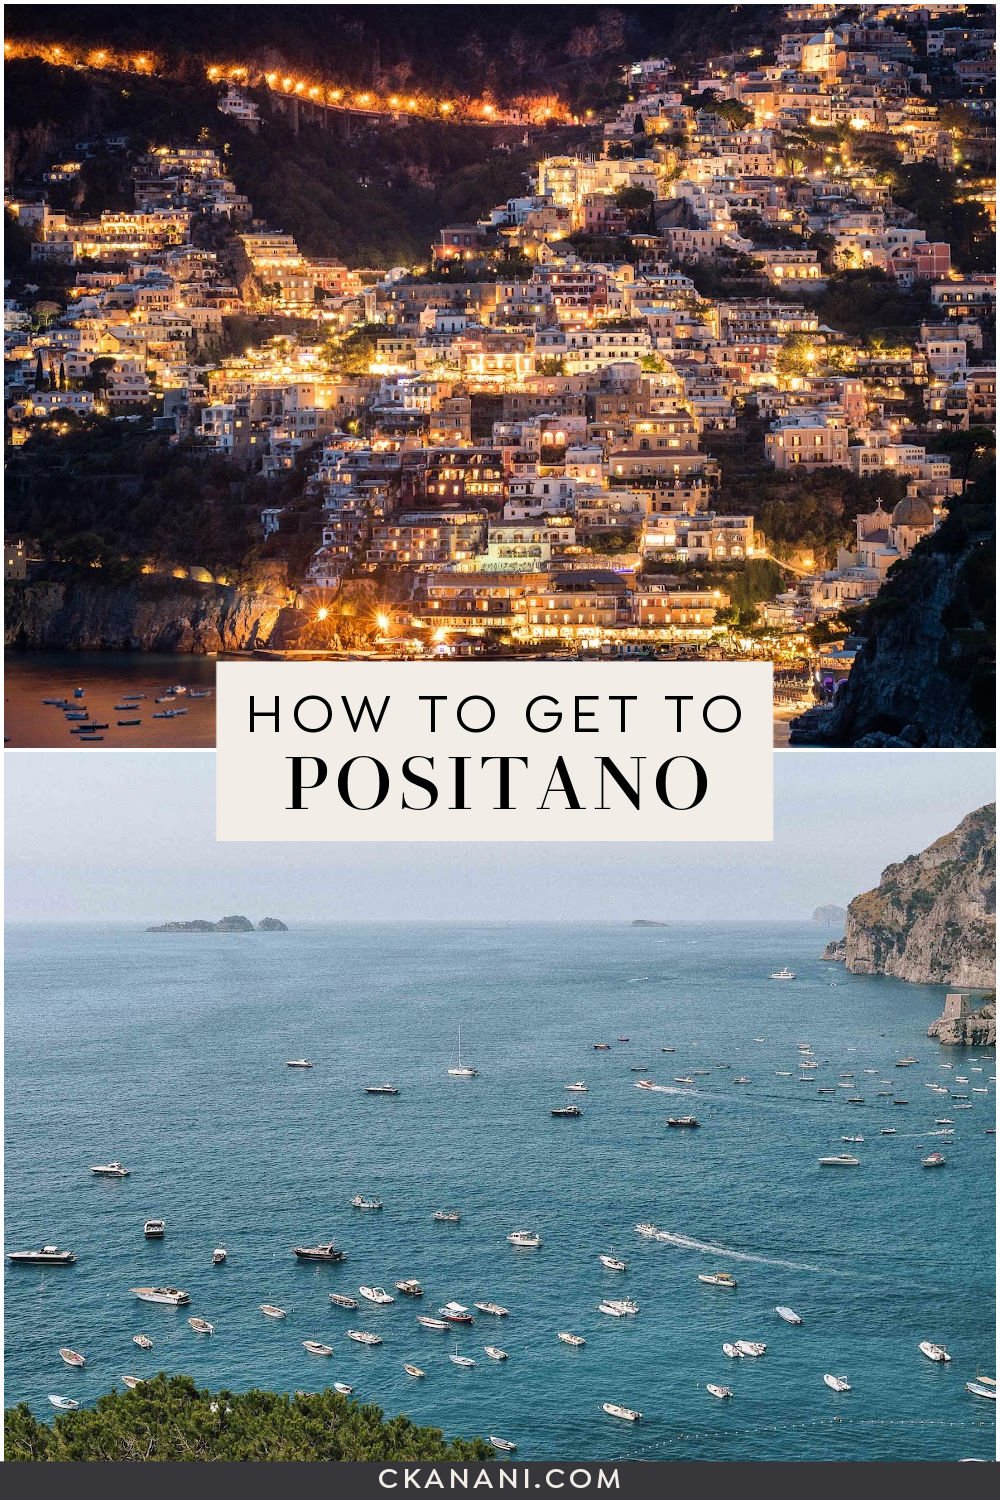 A detailed guide on how to get to Positano Italy. From Rome to Positano, from Naples to Positano, from Sorrento to Positano, and more. Positano travel guide, Positano itinerary